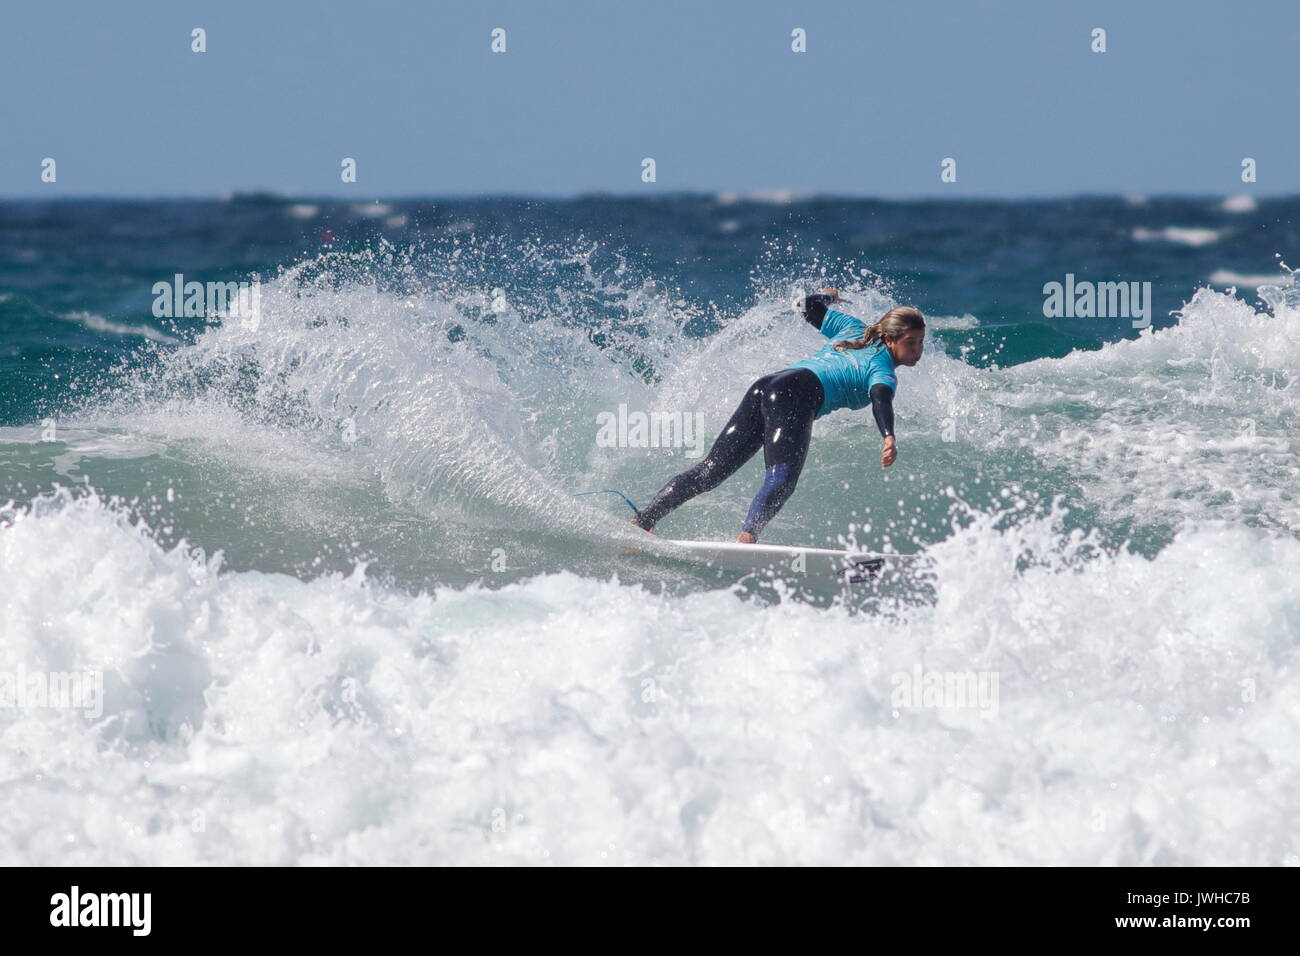 Fistral Beach, Newquay, Cornwall, UK. 12th Aug, 2017. Surfers take part in Day 4 of the Boardmasters Championship. Competitors from around the world take part in the UK's biggest surf contest. Credit: Nicholas Burningham/Alamy Live News Stock Photo